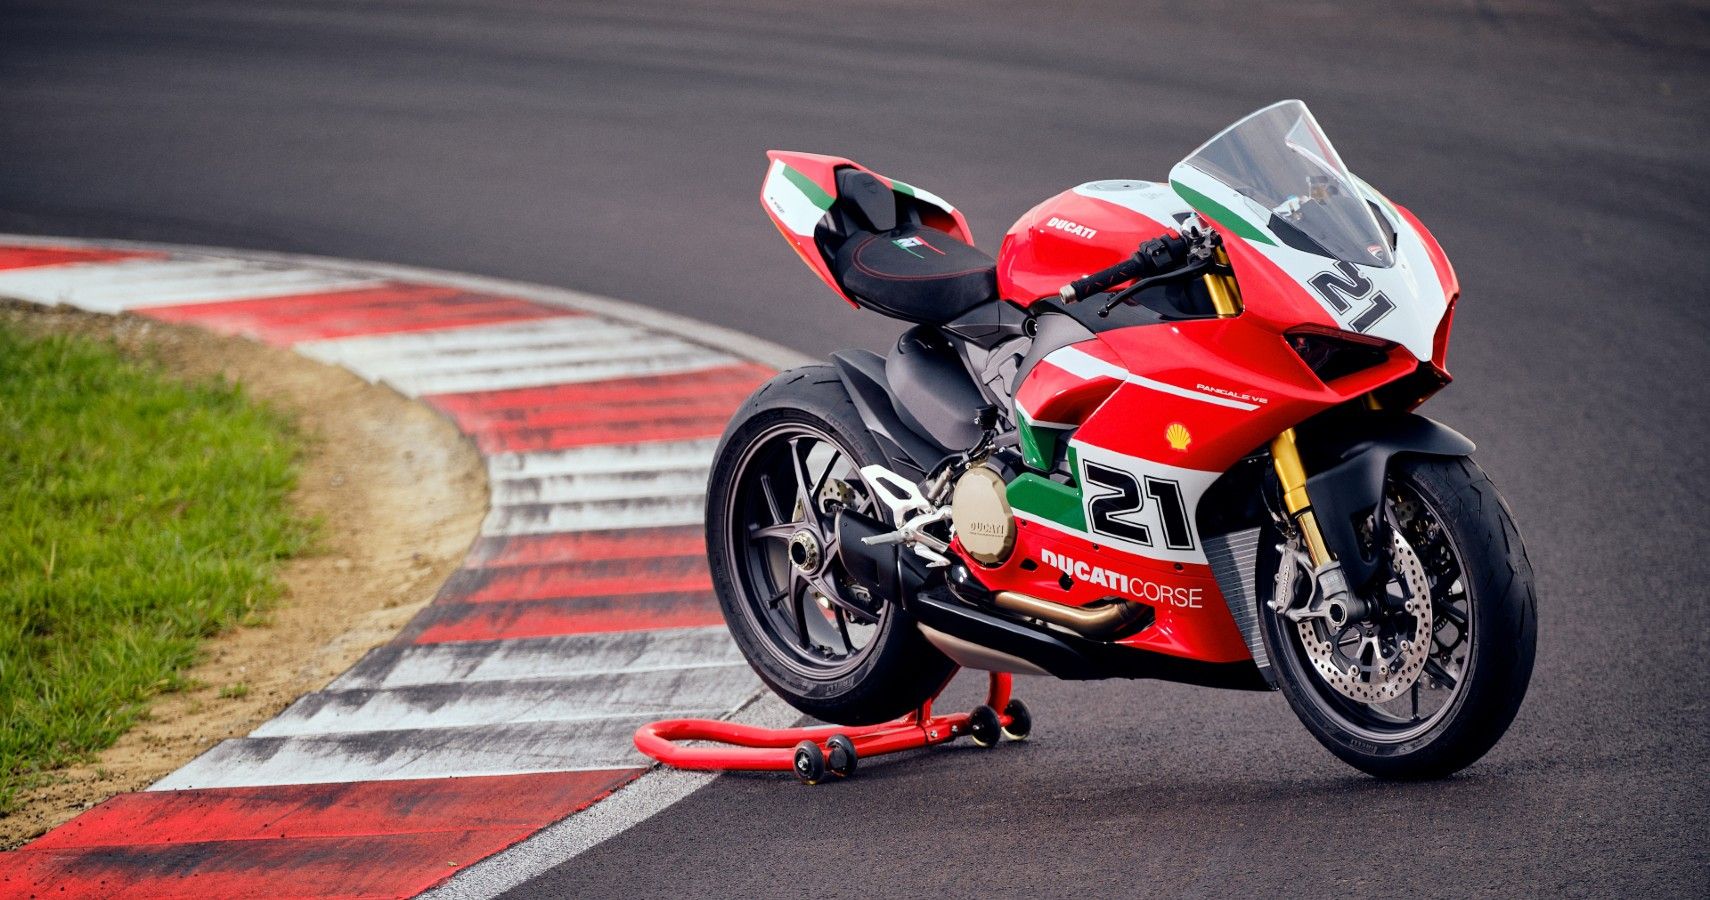 A Ducati Panigale V2 Bayliss 1st Championship 20th Anniversary parked.